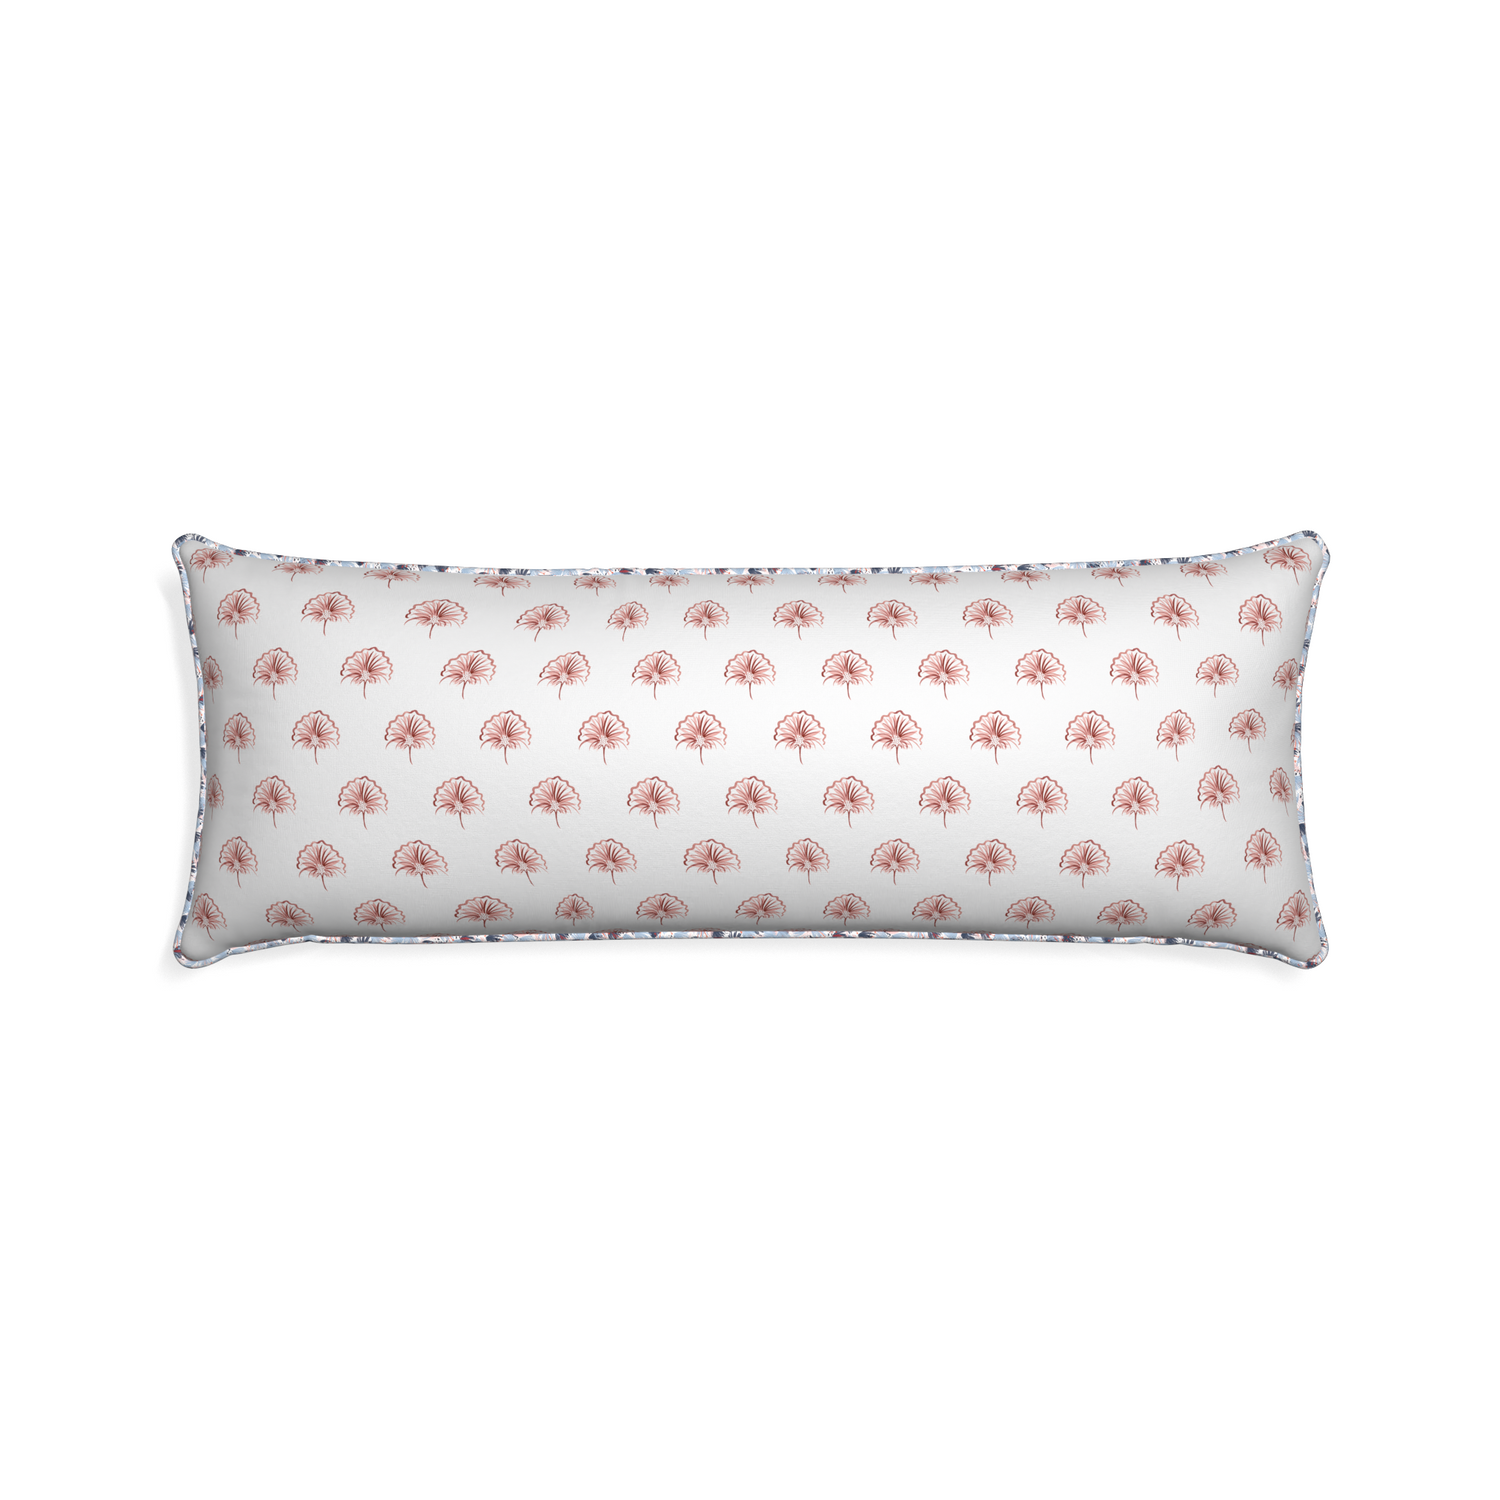 Xl-lumbar penelope rose custom floral pinkpillow with e piping on white background